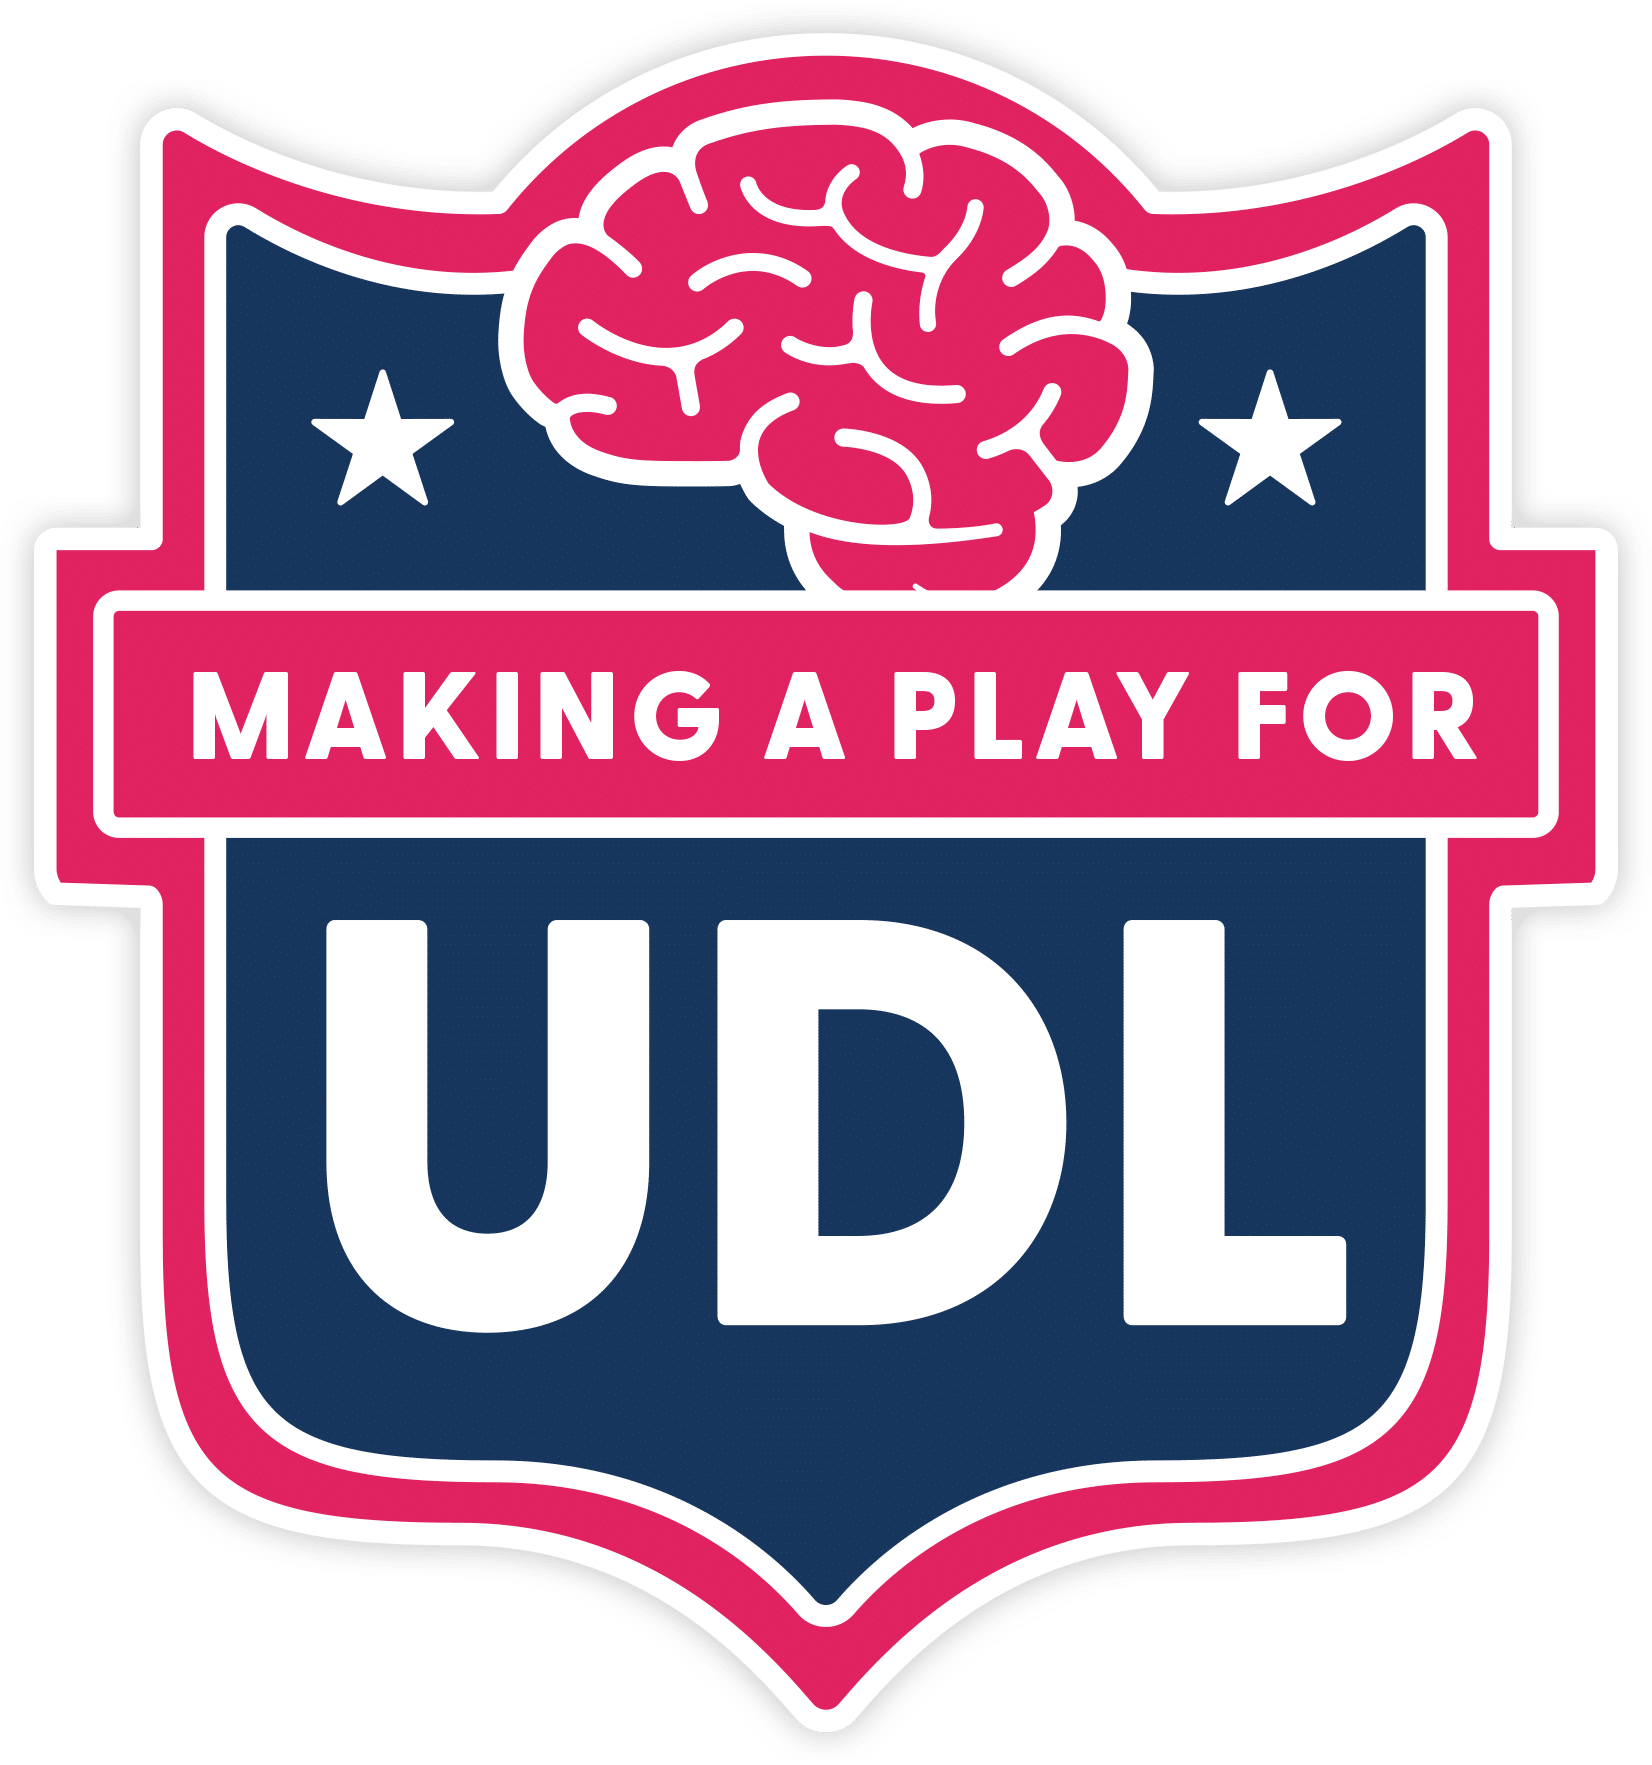 Making a Play for UDL Badge